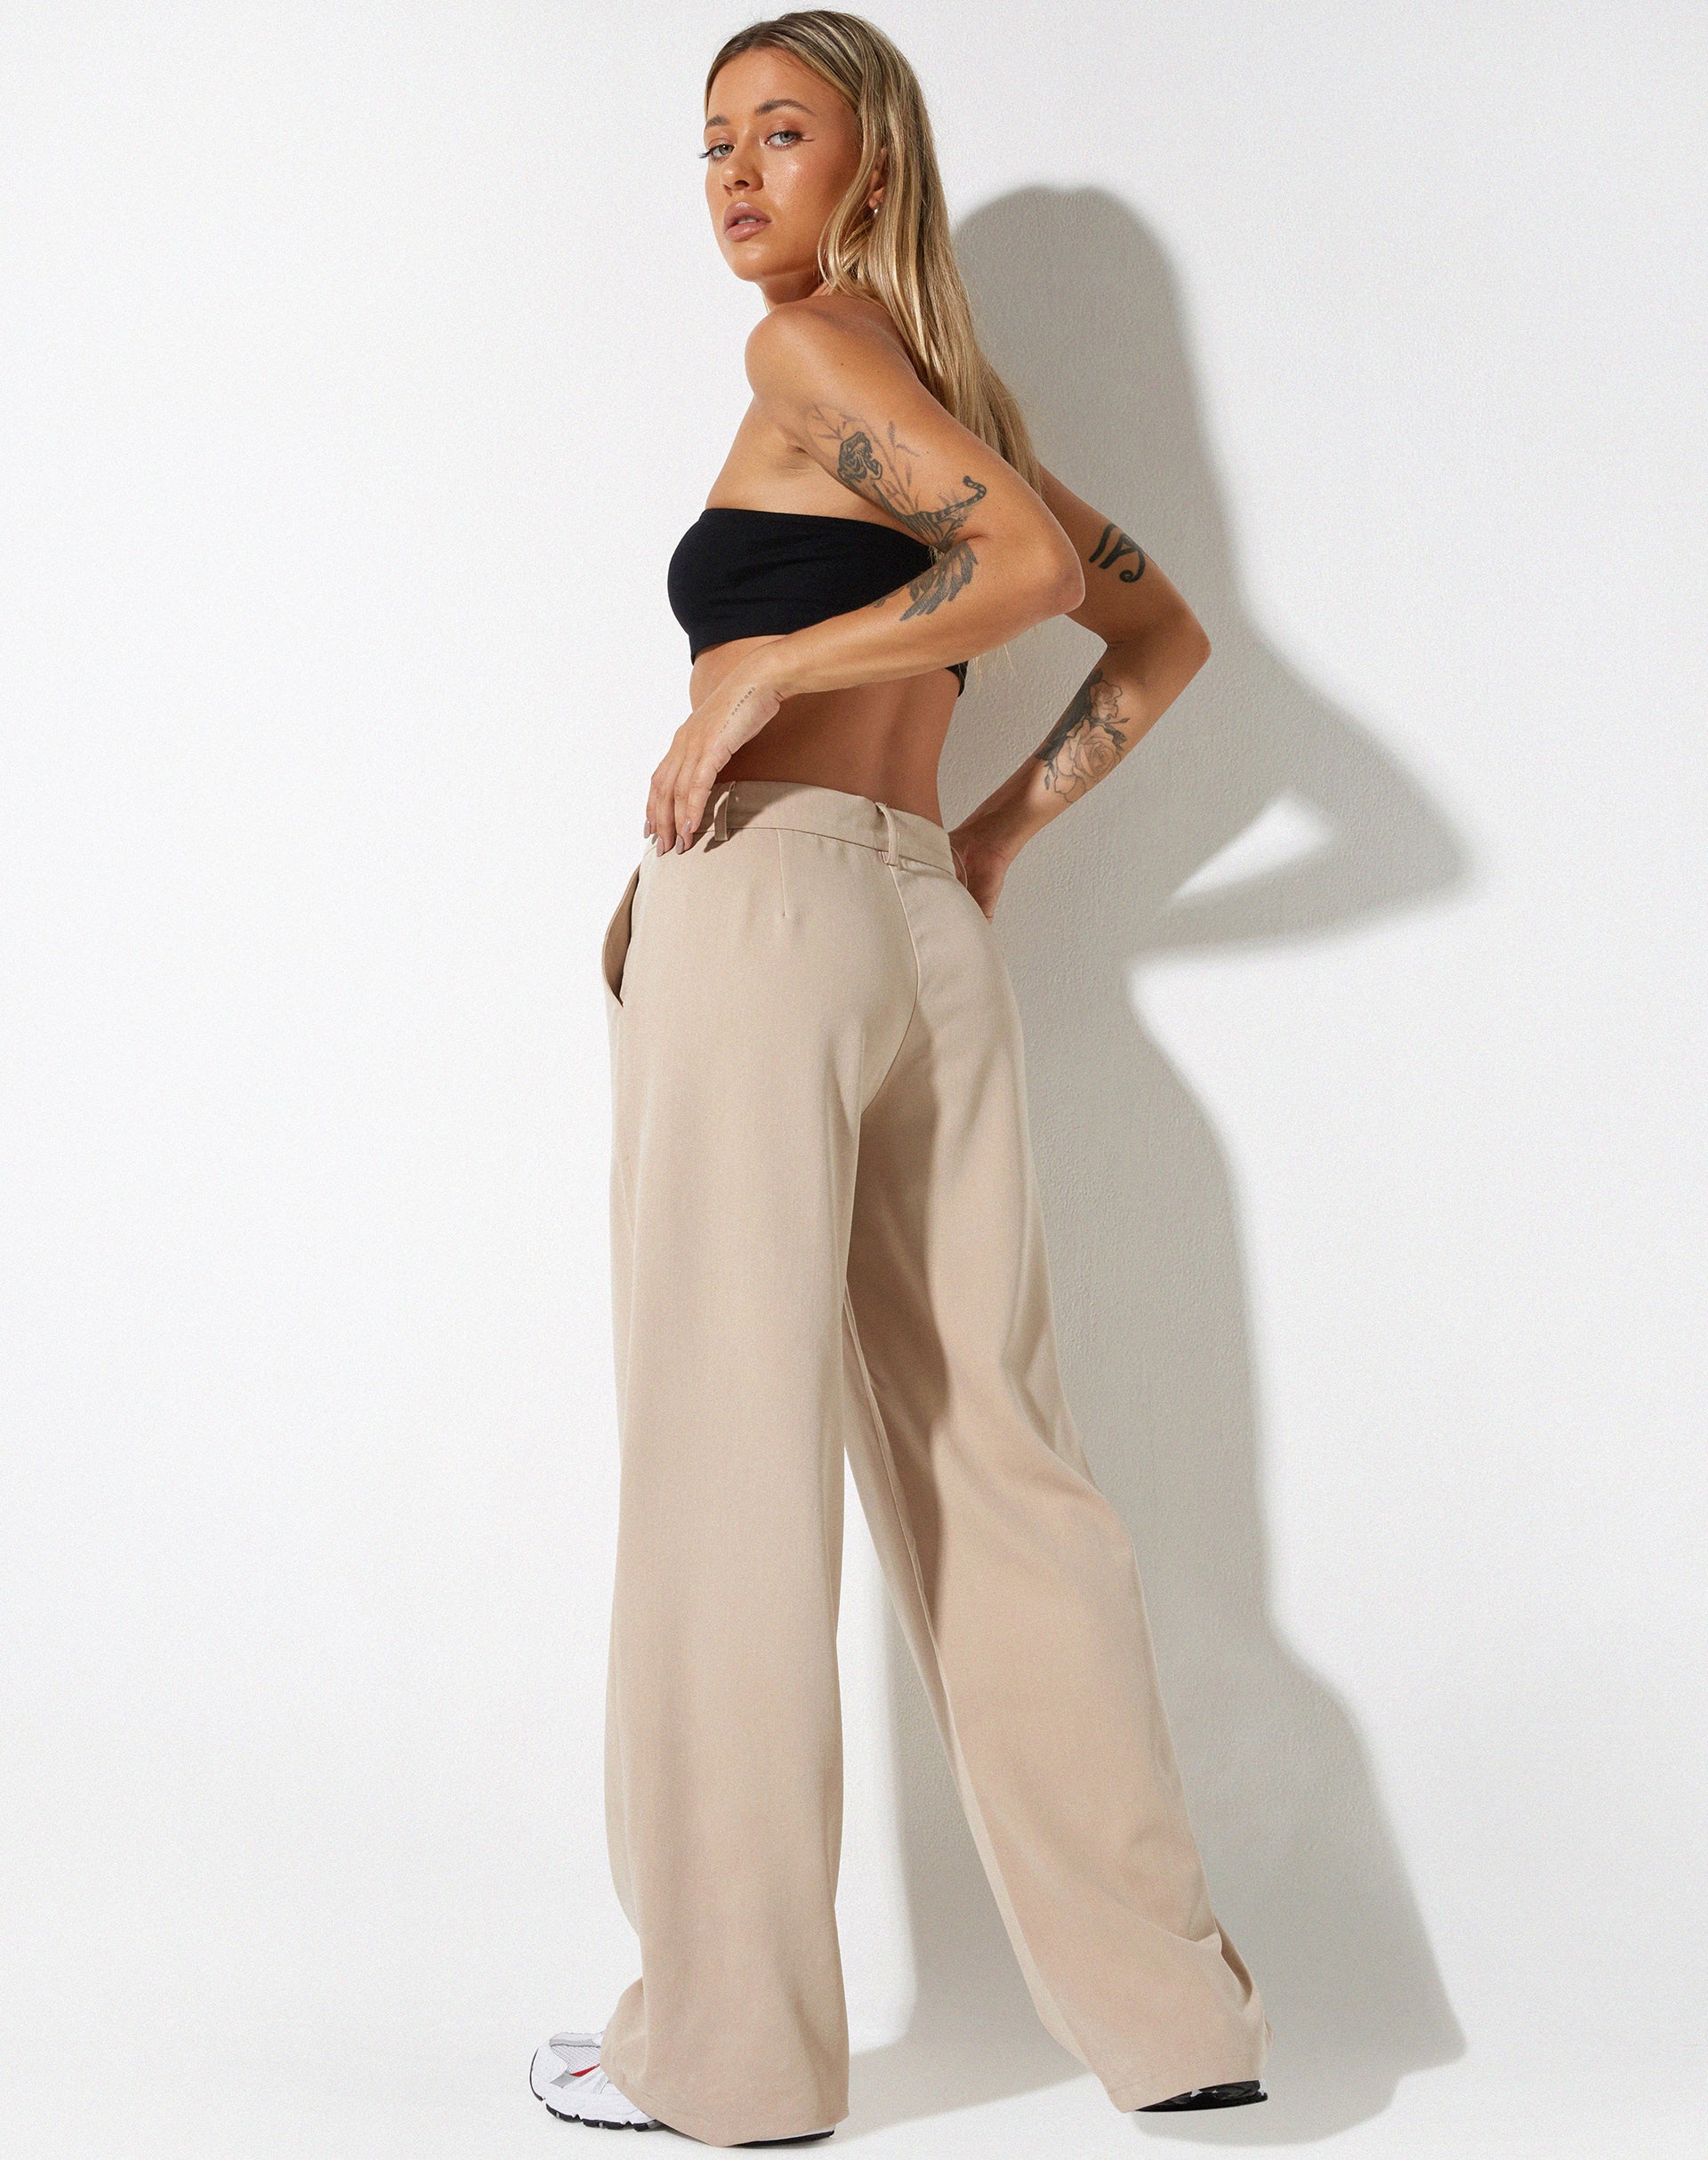 image of Abena Trouser in Soft Tailoring Beige